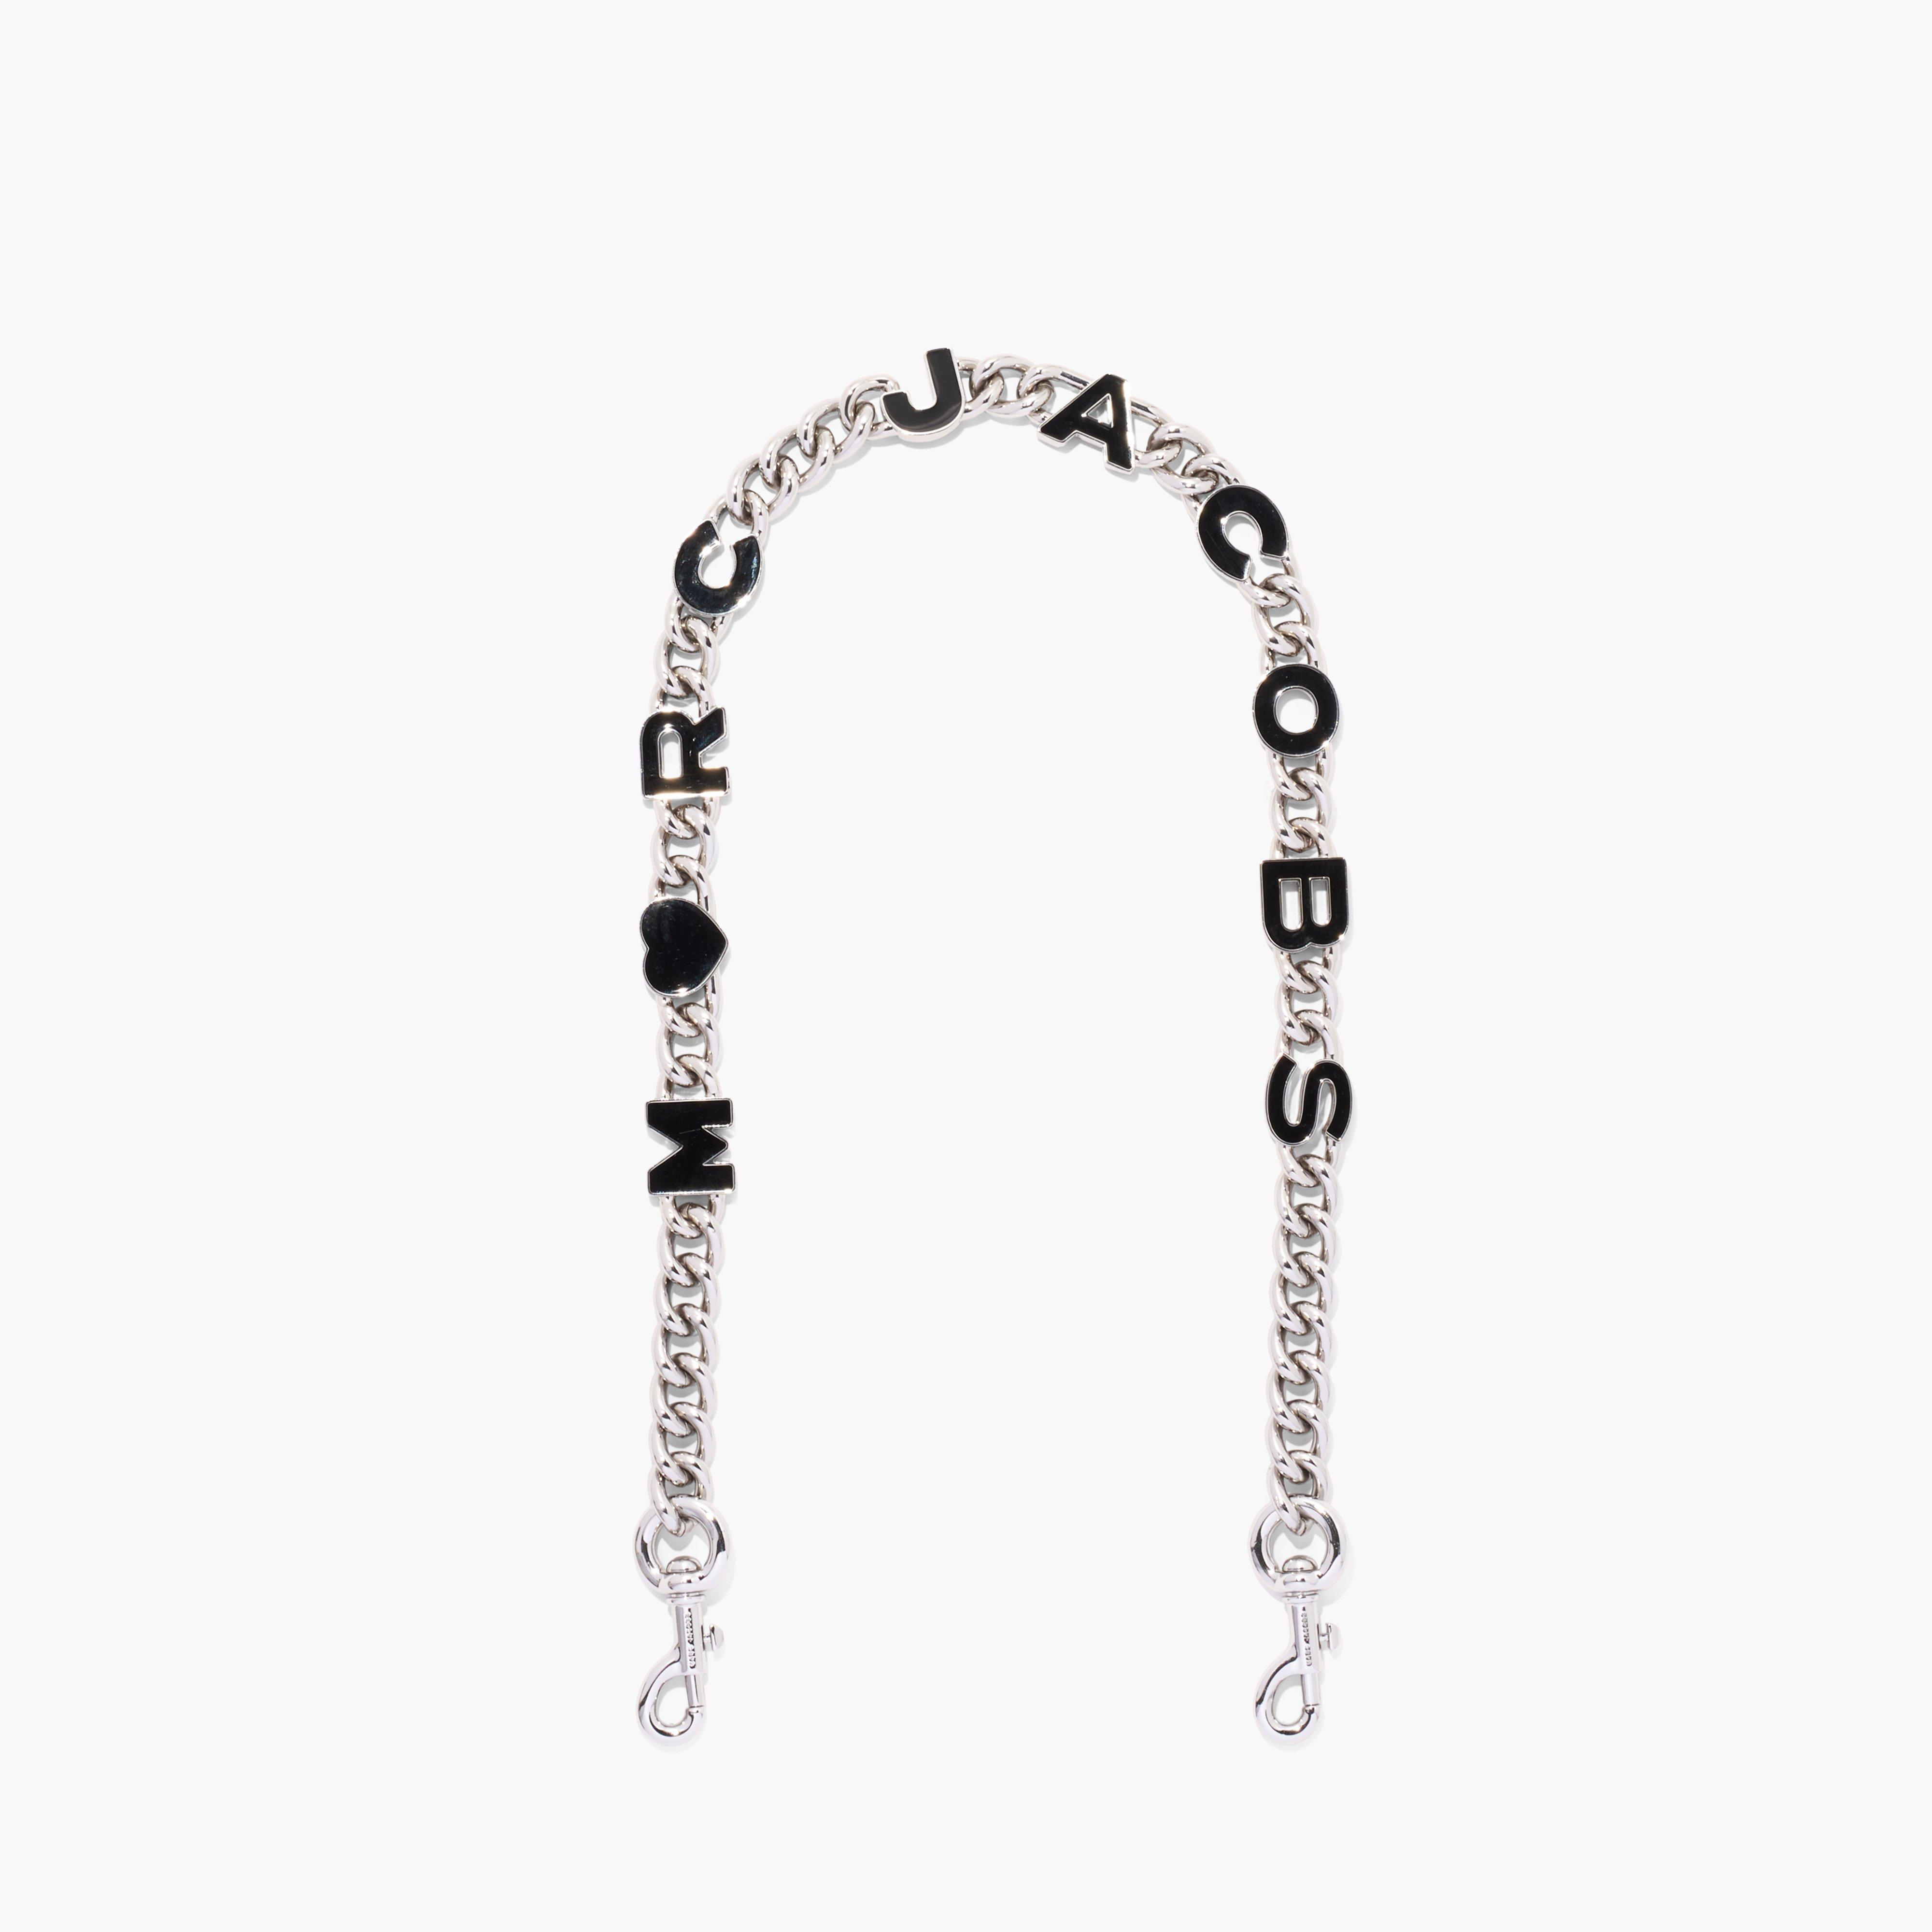 Marc by Marc jacobs The Heart Charm Chain Shoulder Strap,BLACK/SILVER